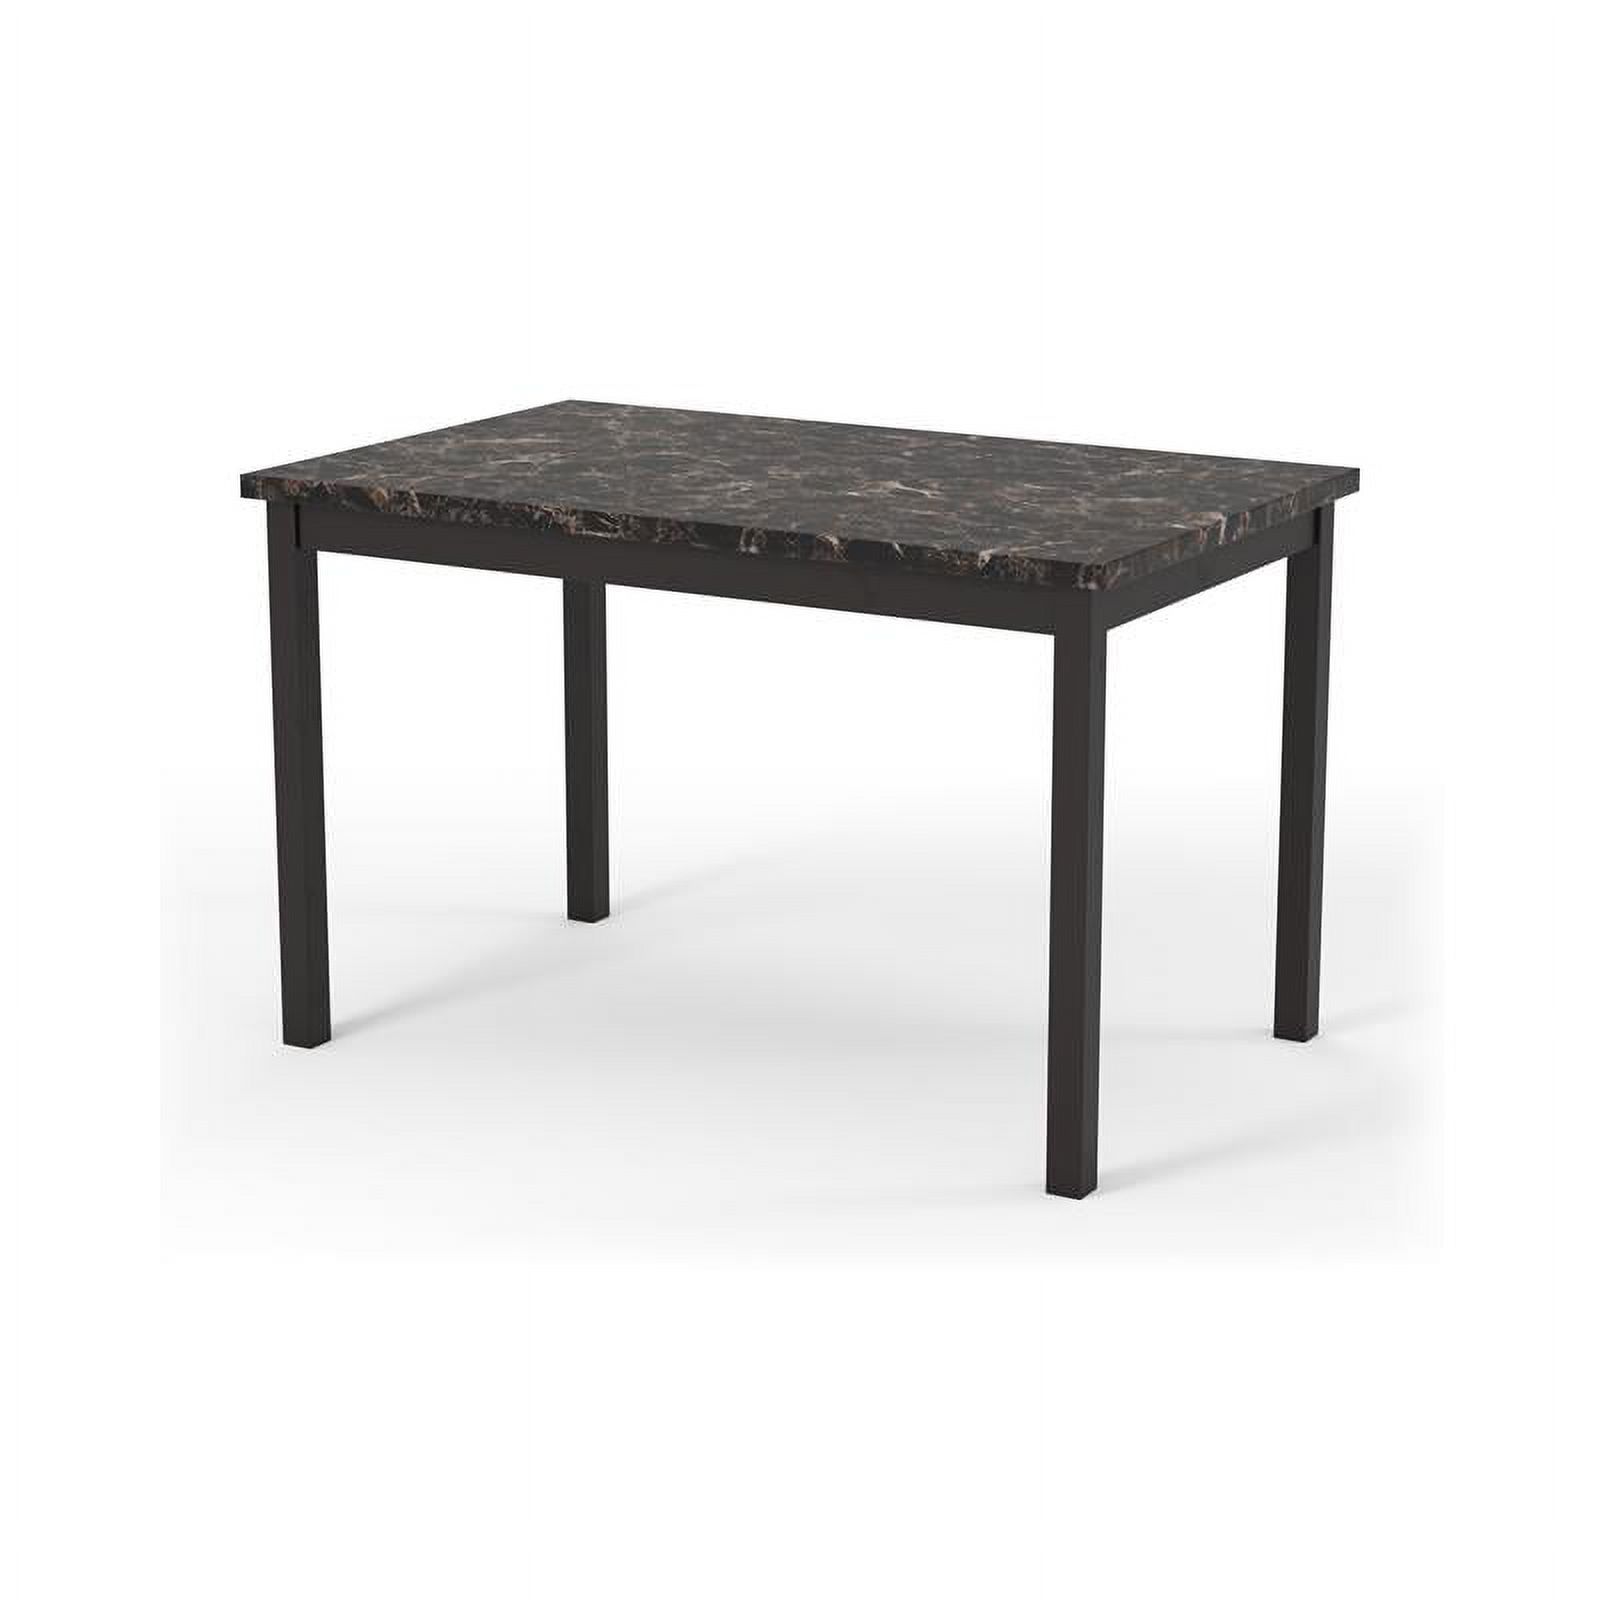 Furniture of America Maxson Transitional Metal 48-Inch Dining Table in Black - image 5 of 10